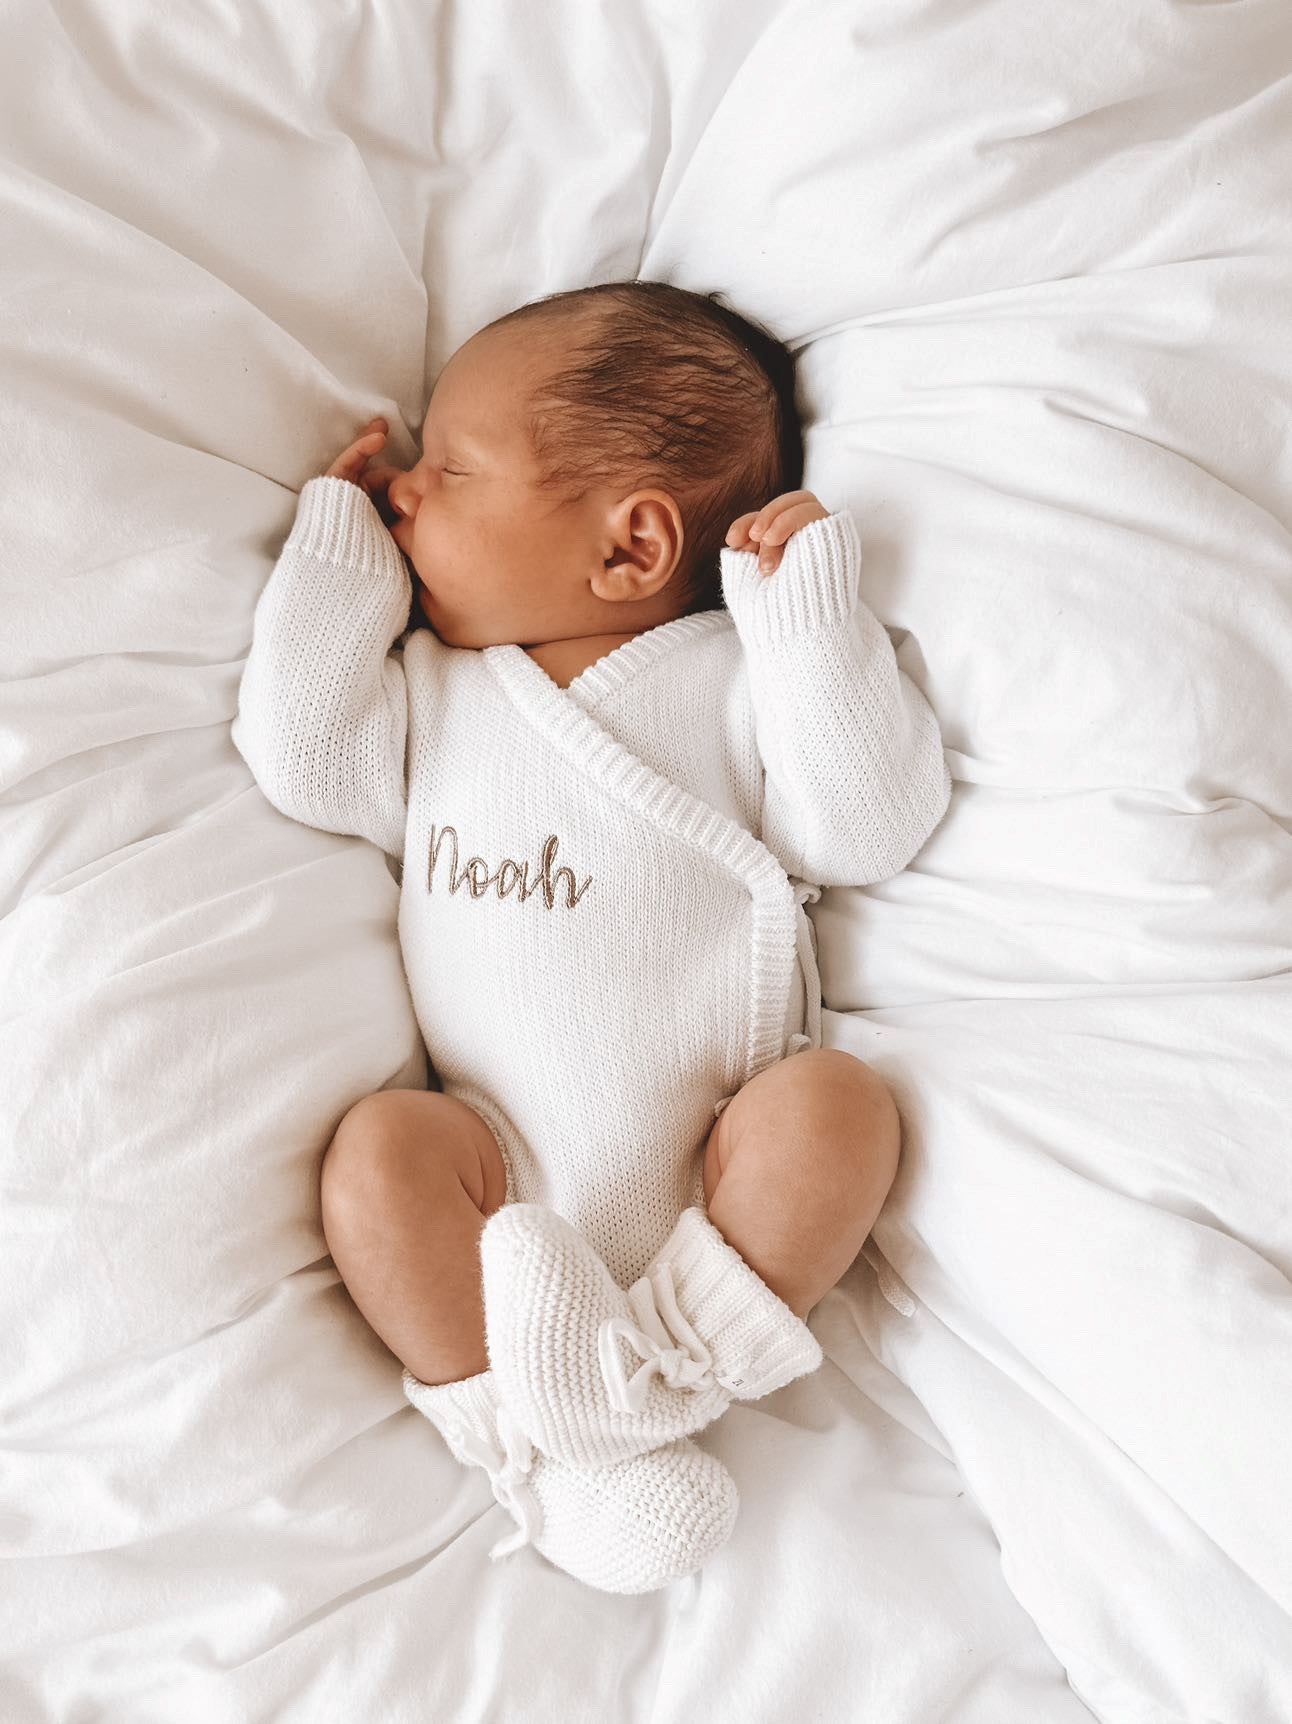 new baby personalised knit romper outfit